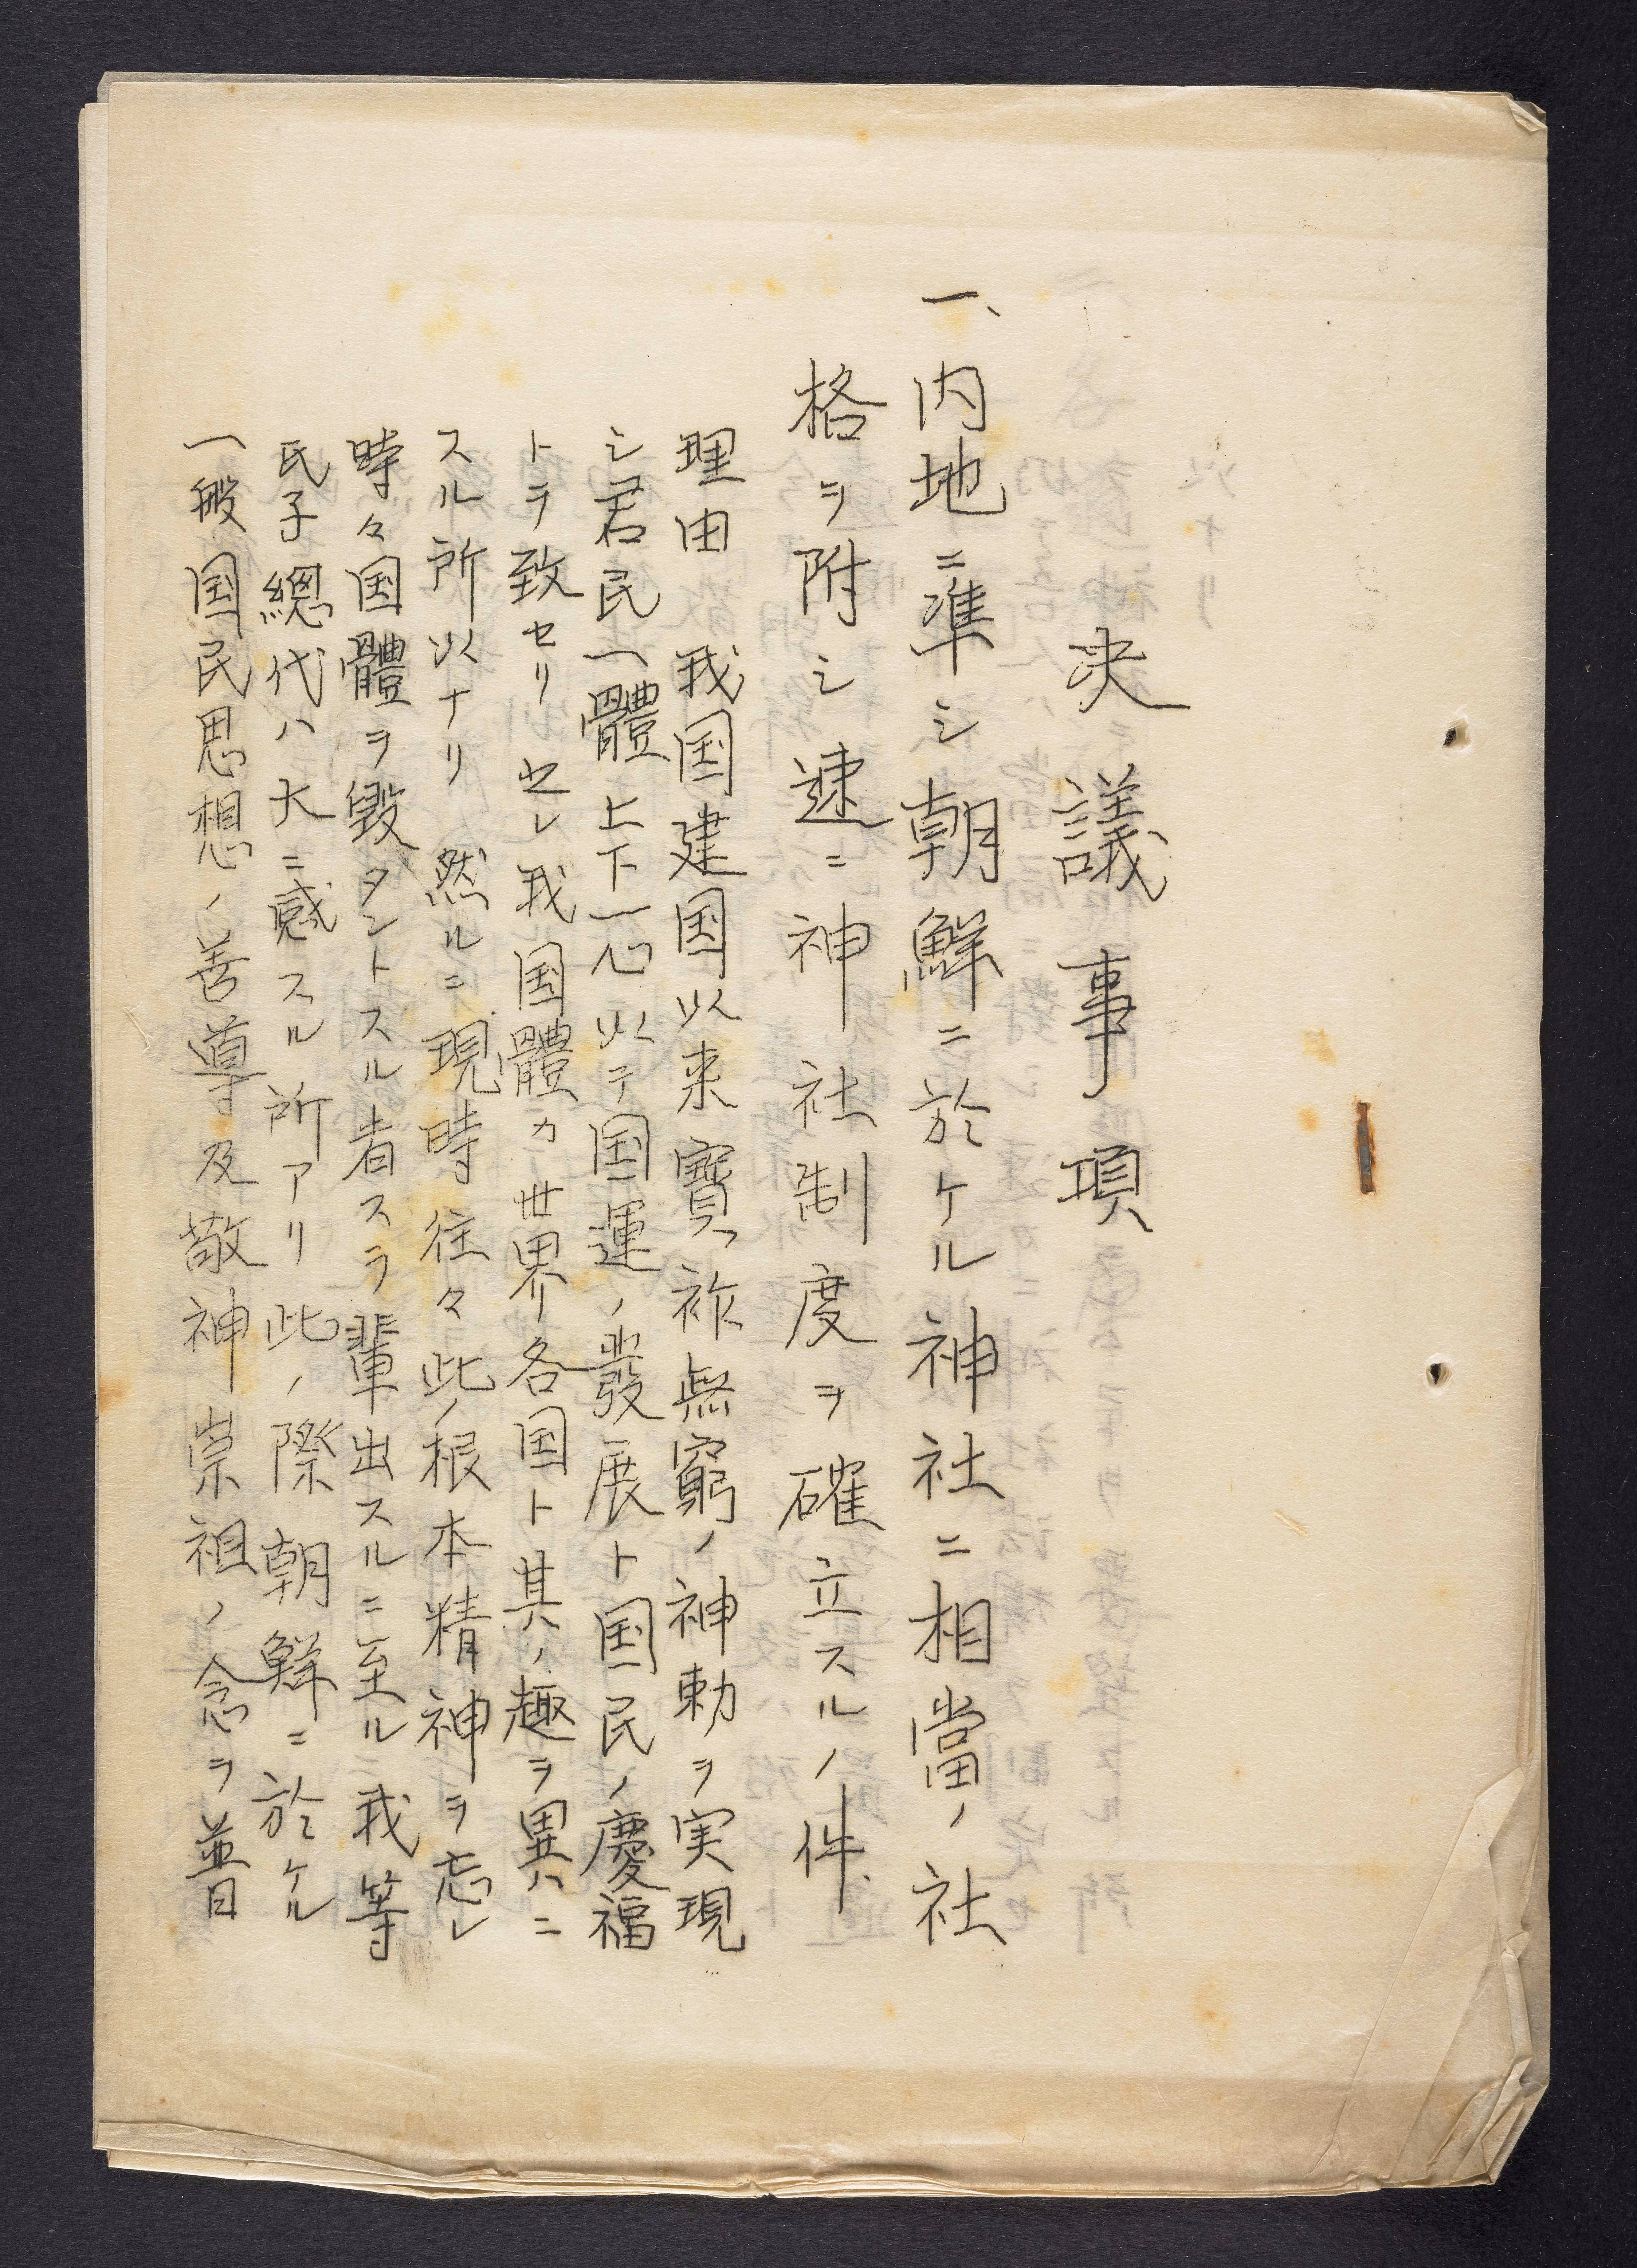 An inside page of a book shows Korean text.